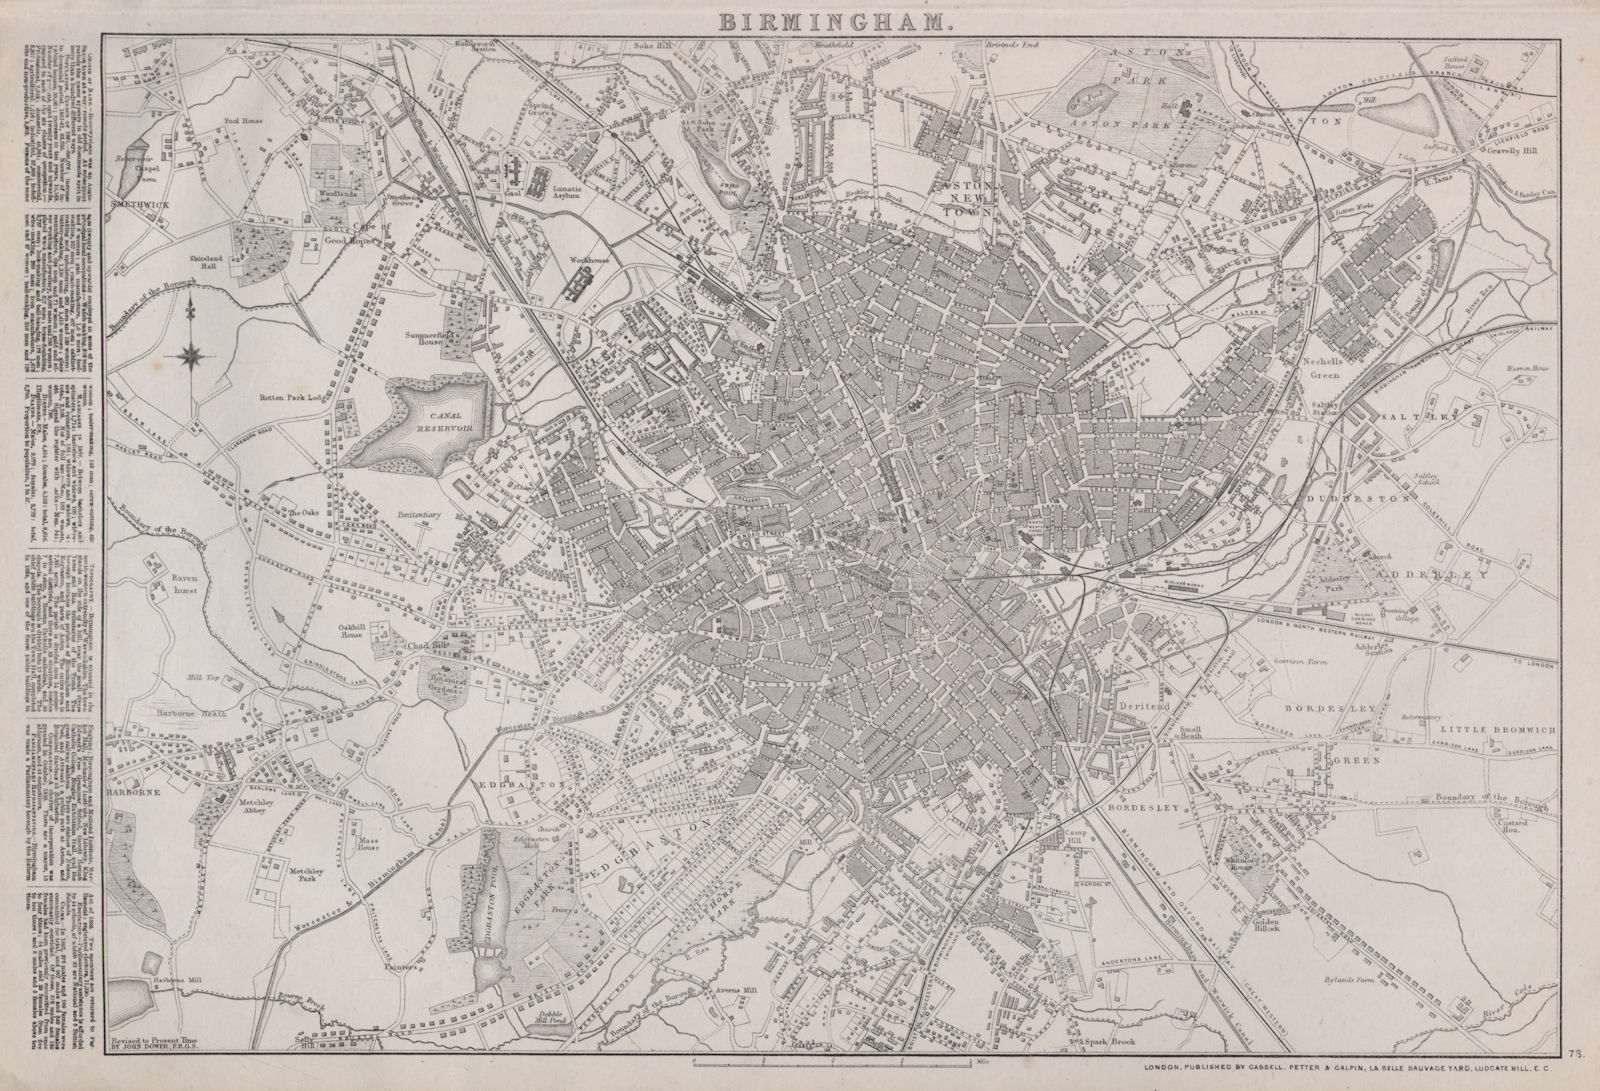 Associate Product BIRMINGHAM. Large town/city plan by JW LOWRY for the Dispatch Atlas 1868 map